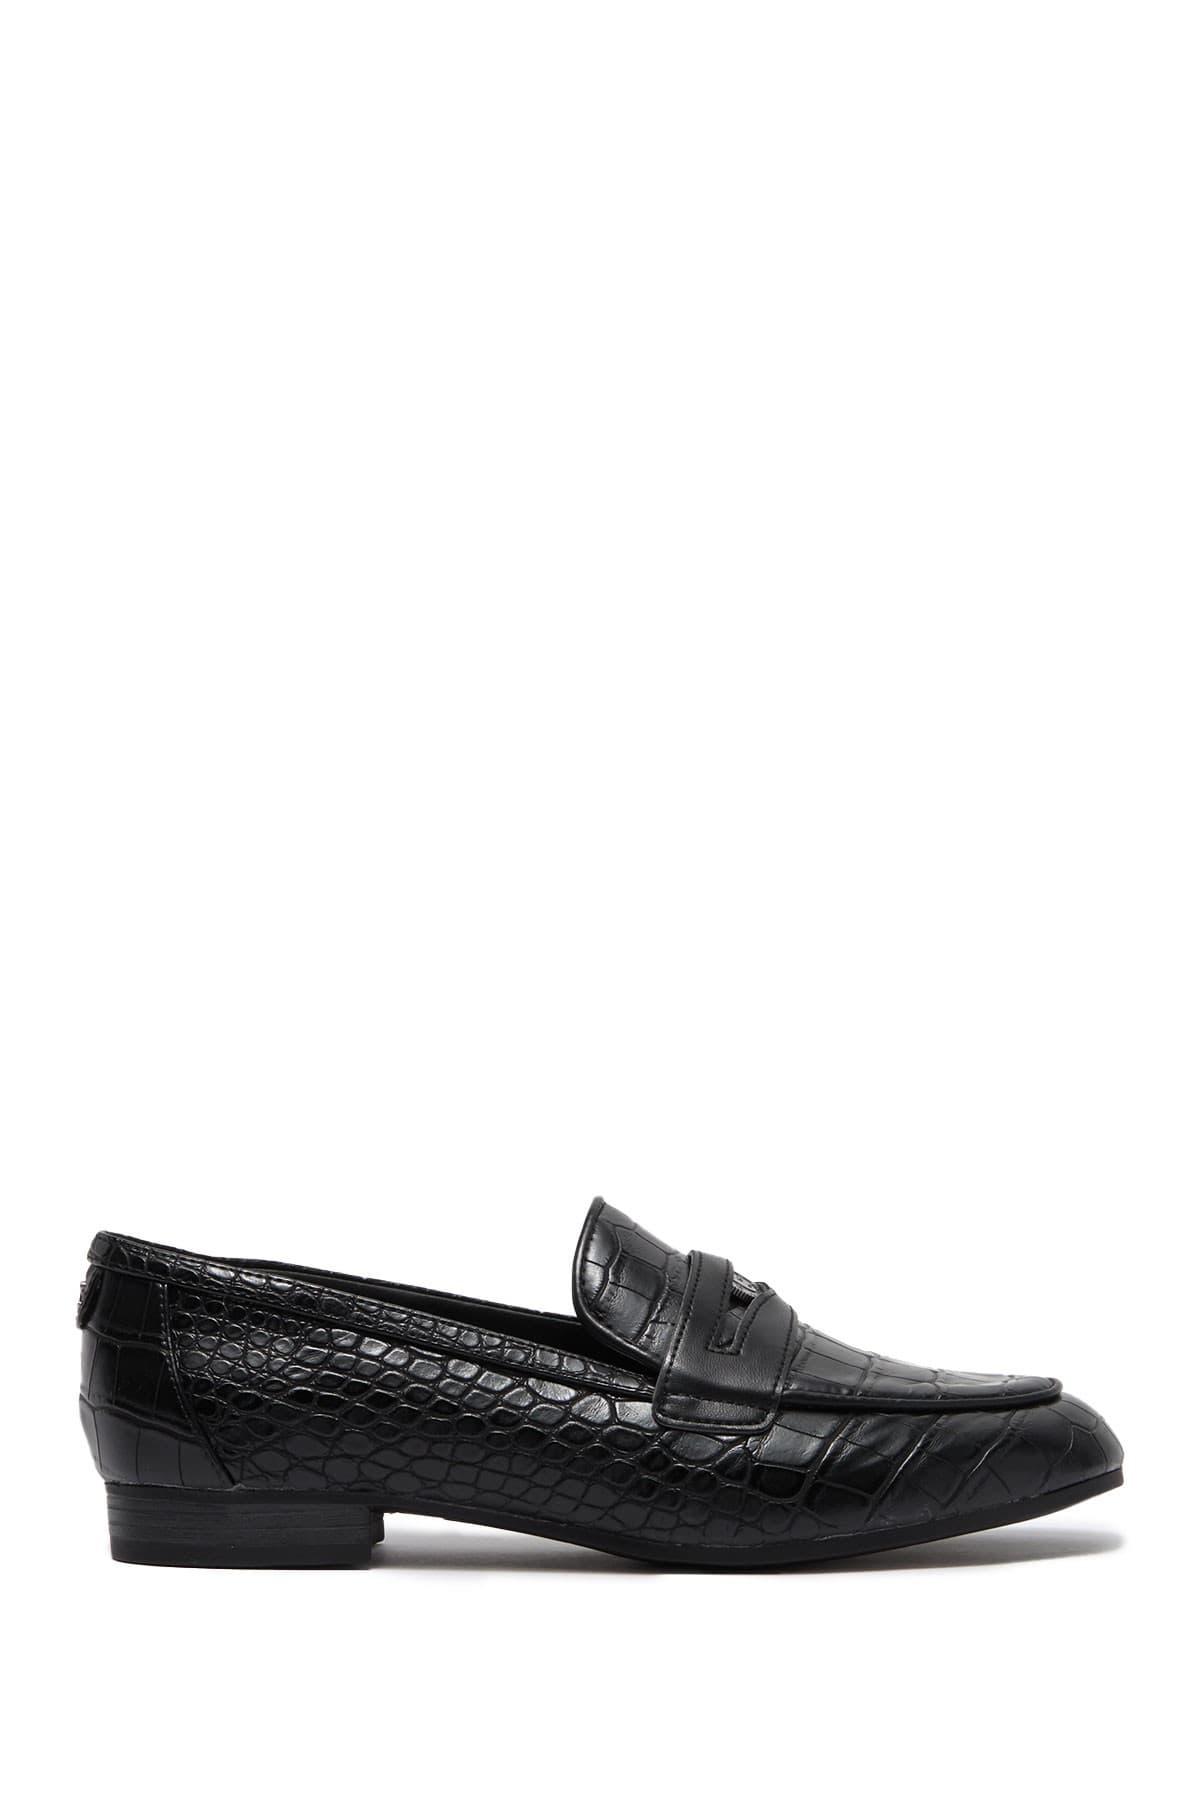 Circus by Sam Edelman Hannon Croc Embossed Penny Loafer in Black - Lyst